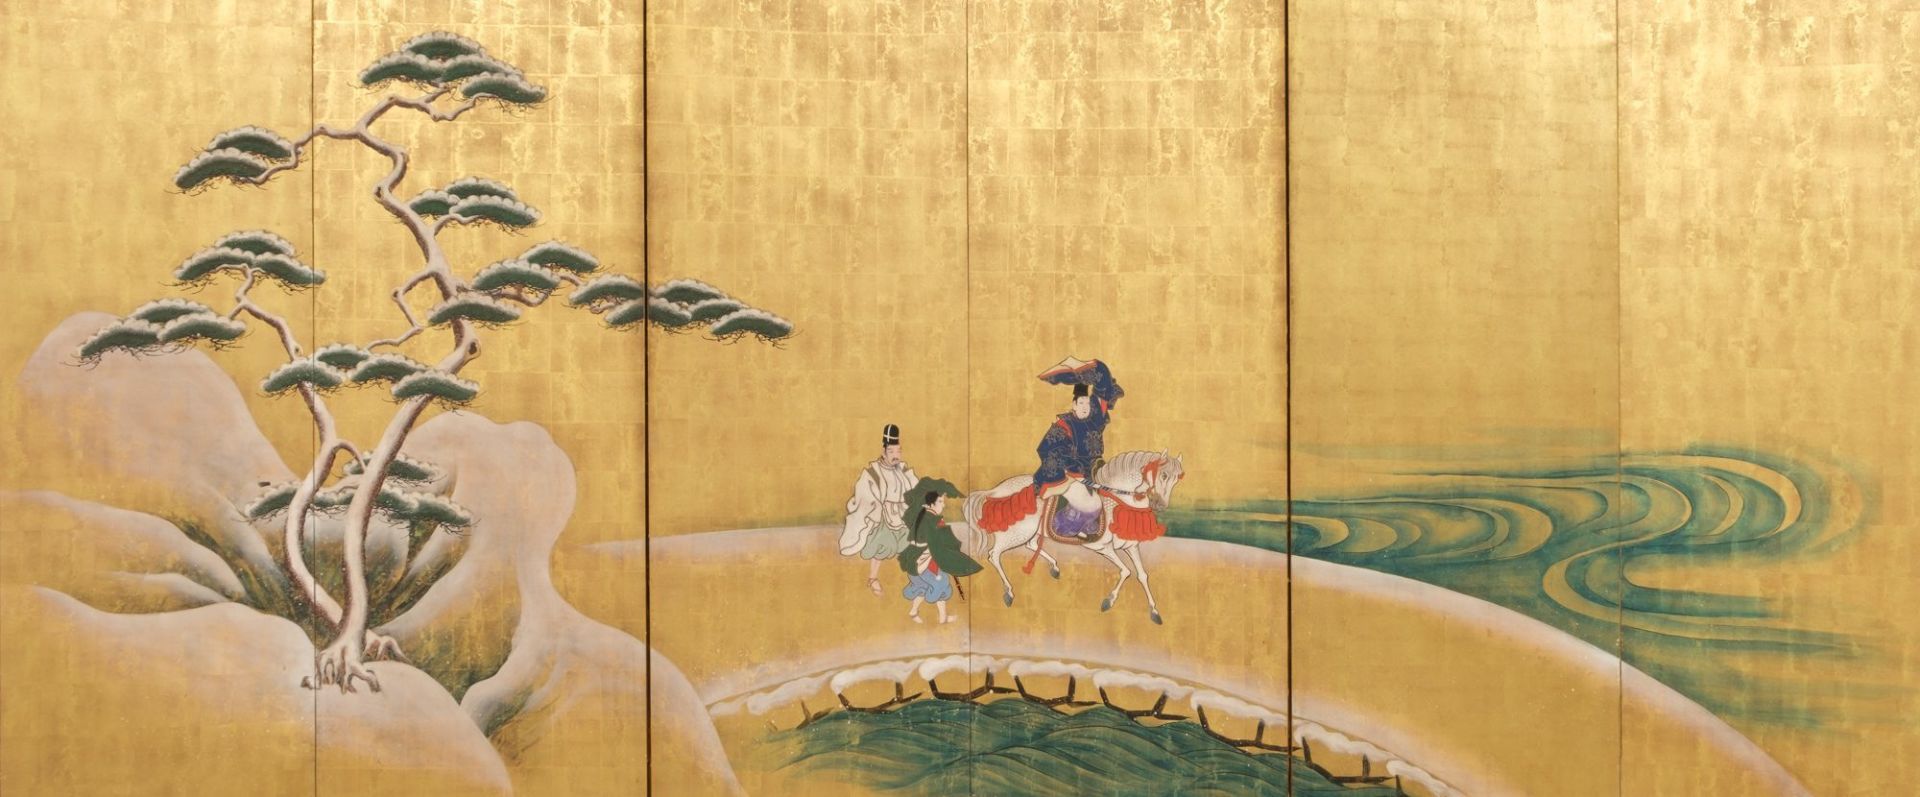 A LARGE JAPANESE 6-PANEL BYÔBU (FOLDING SCREEN) WITH GENJI RIDING A HORSE, LATE 18TH-EARLY 19TH CENT - Image 2 of 9